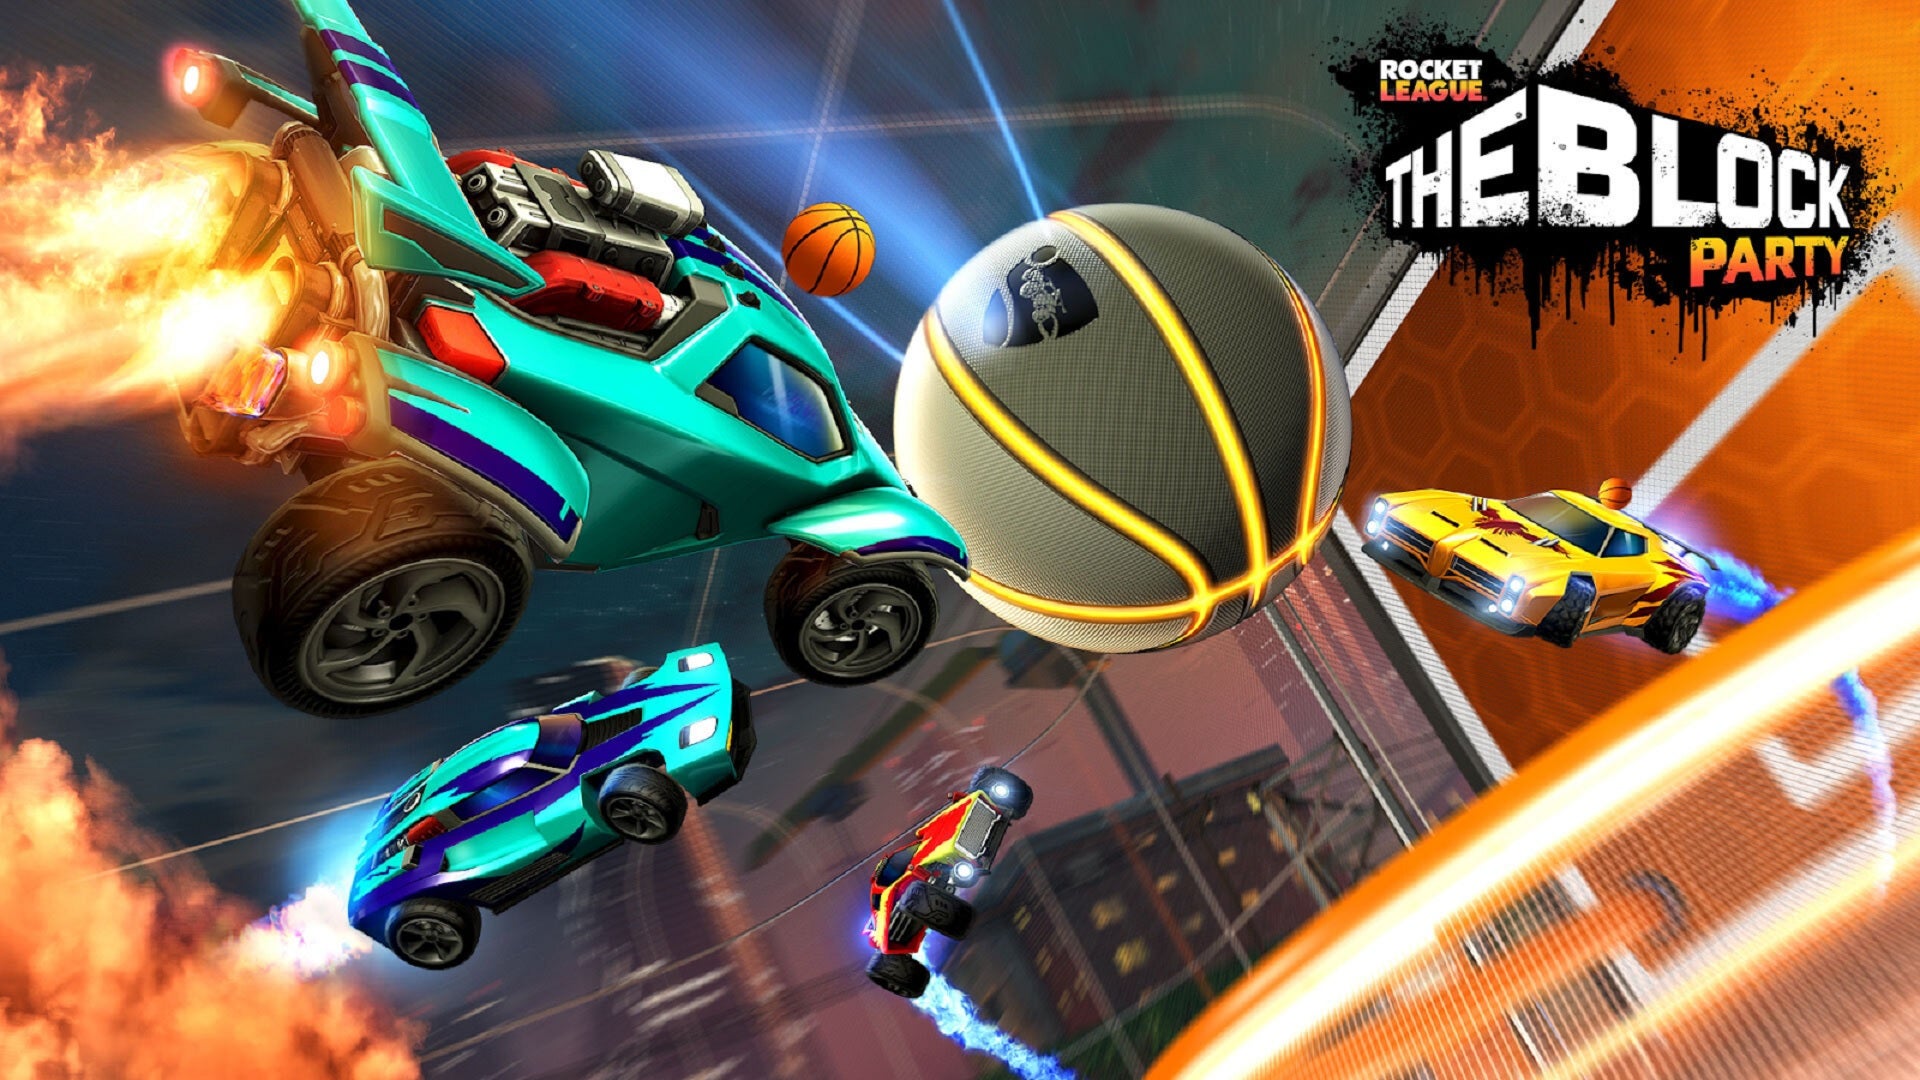 Rocket League key art for the hoops event.